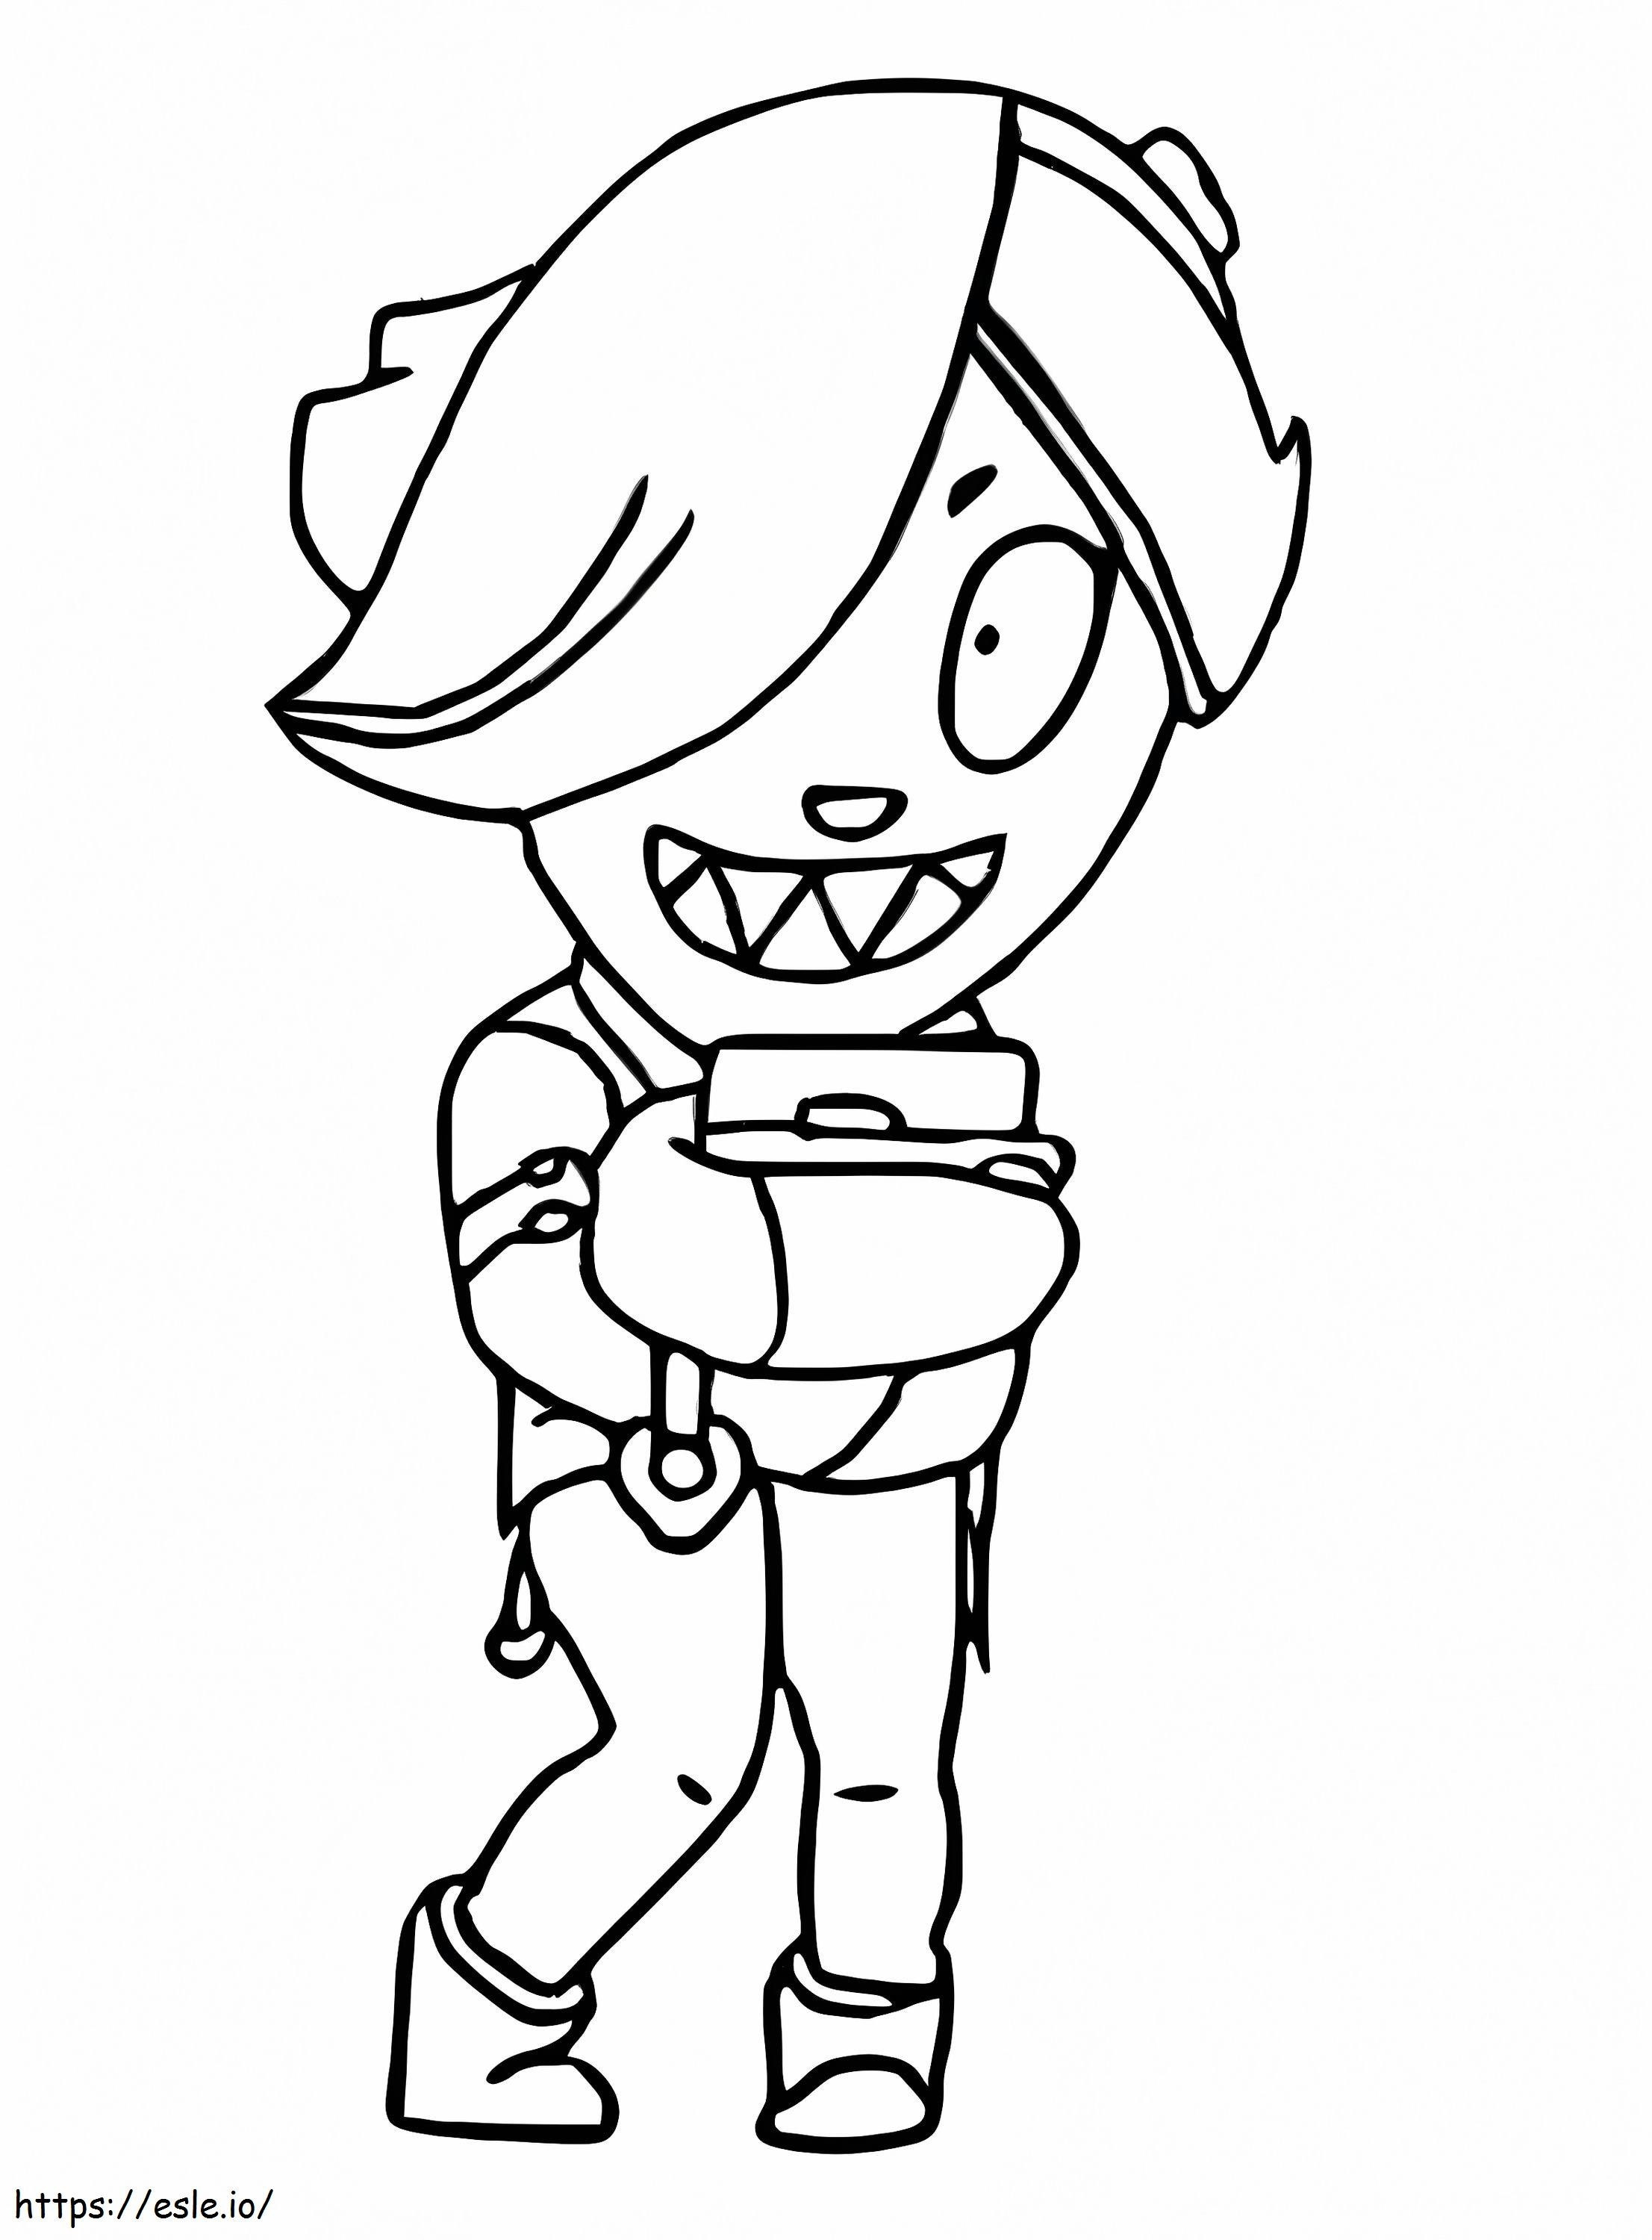 Colette Brawl Stars 2 coloring page